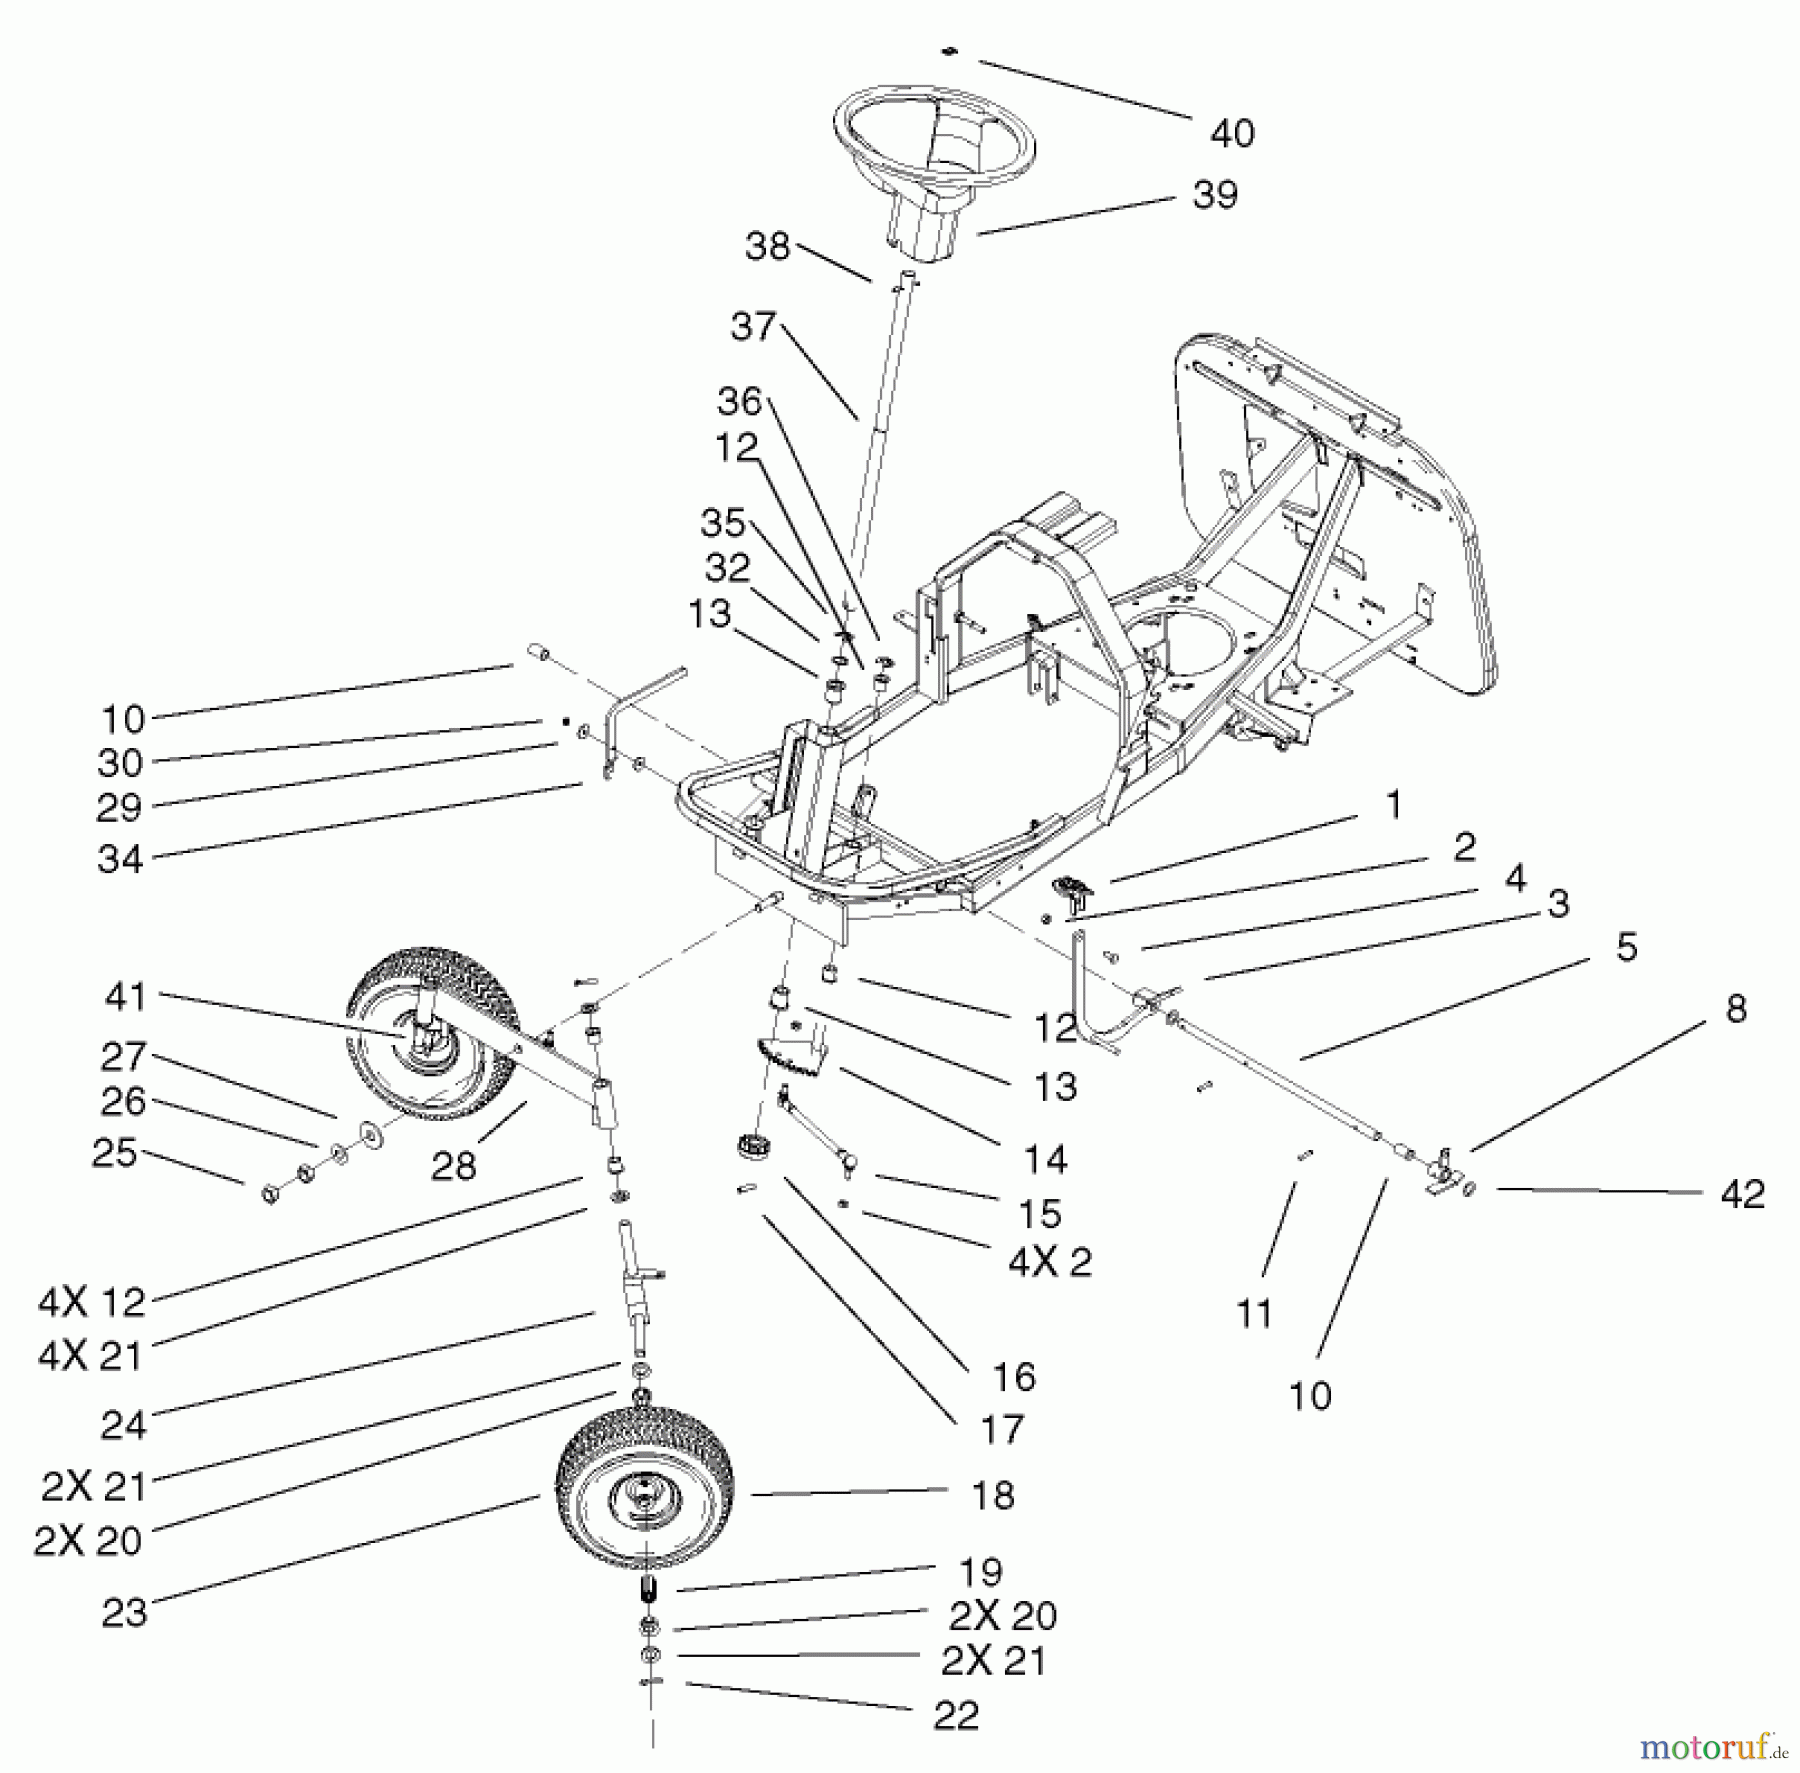  Toro Neu Mowers, Rear-Engine Rider 70125 (13-32G) - Toro 13-32G Rear Engine Rider, 2002 (220000001-220999999) FRONT AXLE AND STEERING ASSEMBLY